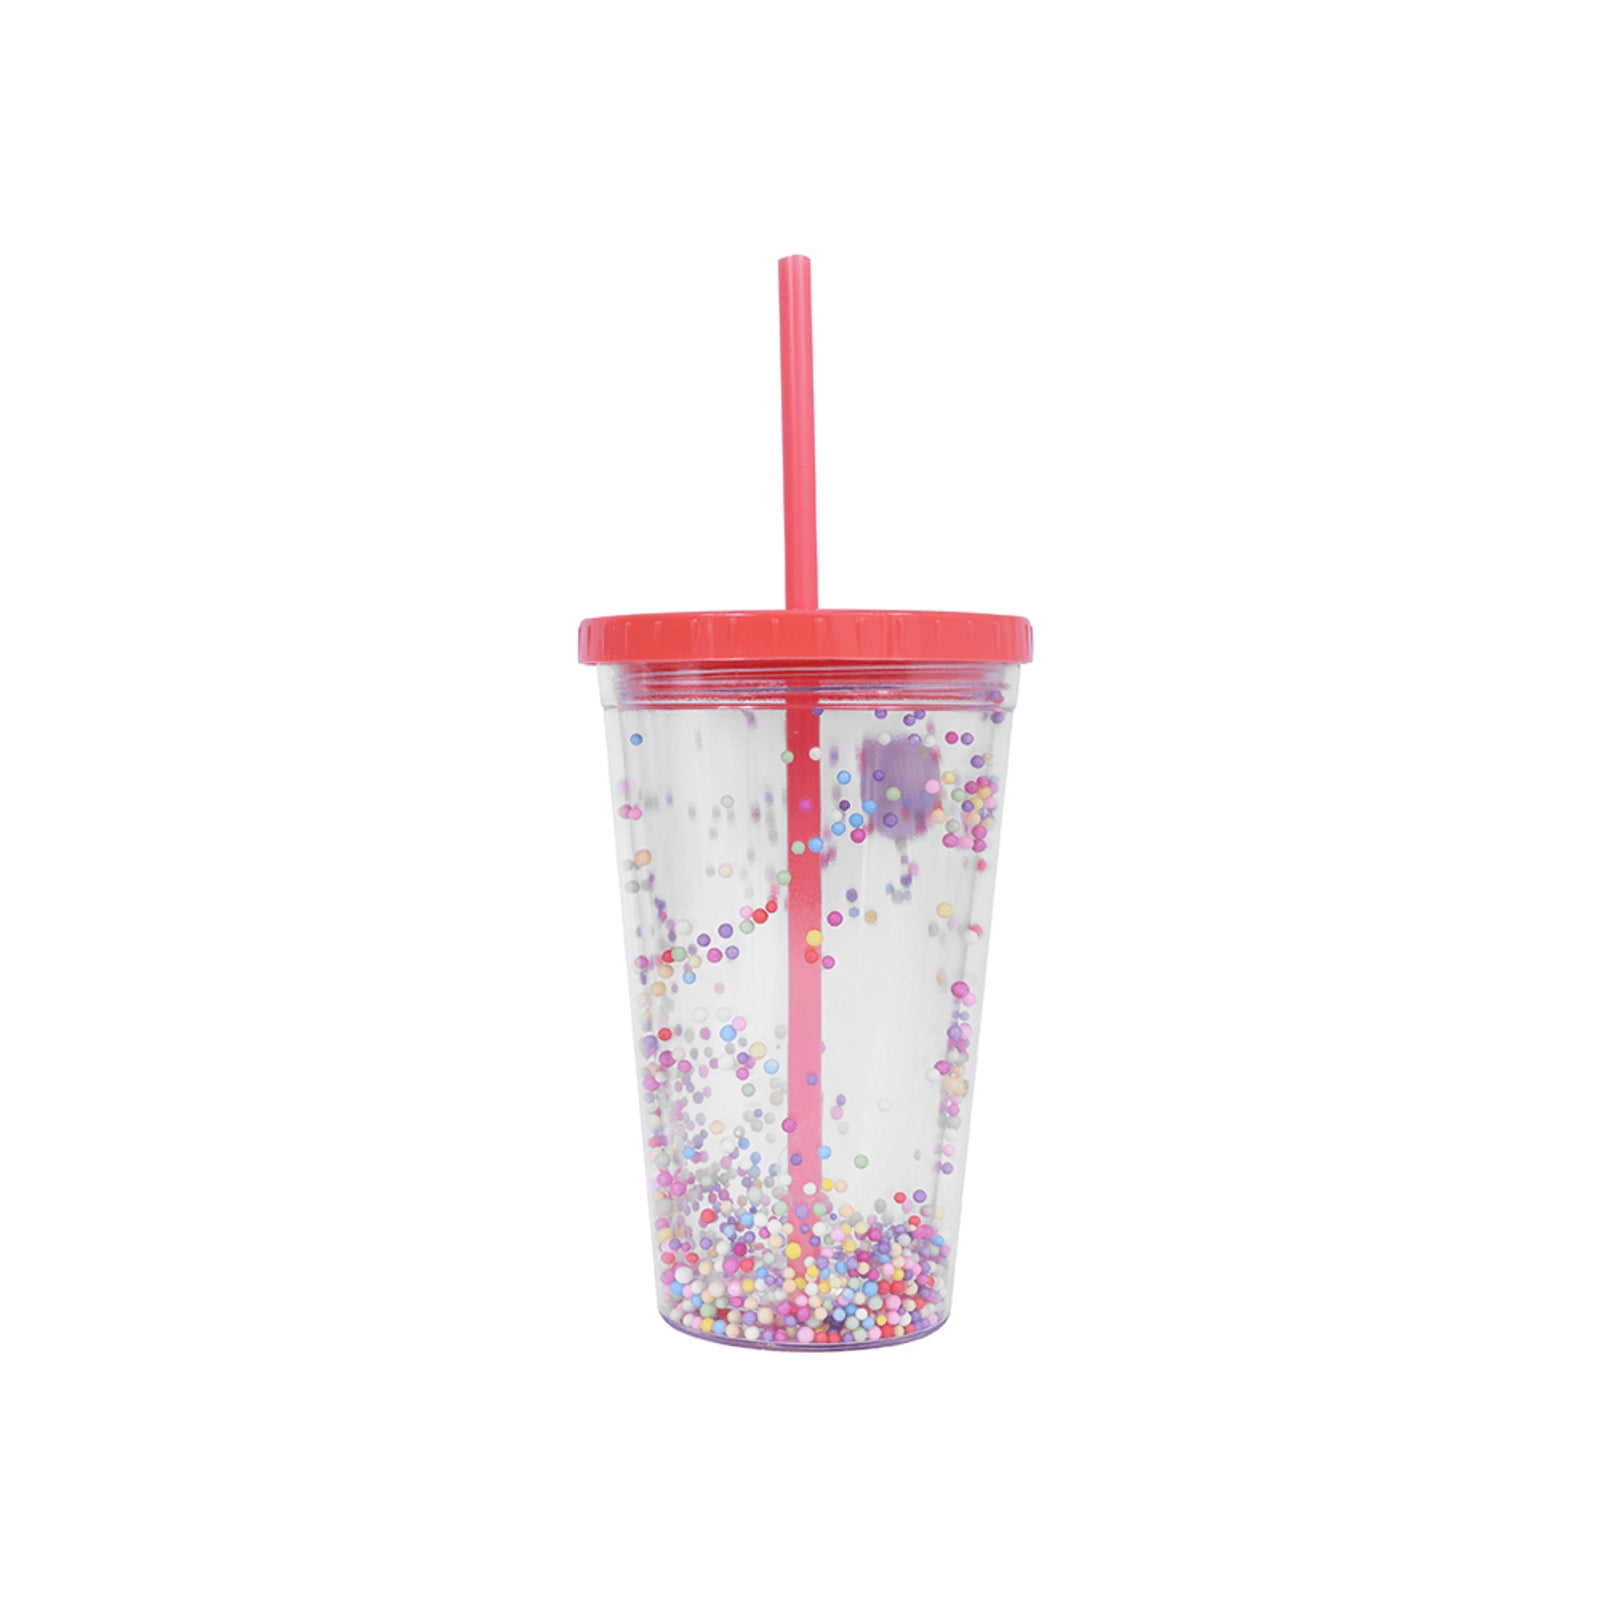 MINISO DOUBLE-LAYERED PLASTIC STRAW WATER BOTTLE WITH DECORATIONS, 450ML 2011824510109 PLASTIC WATER BOTTLE